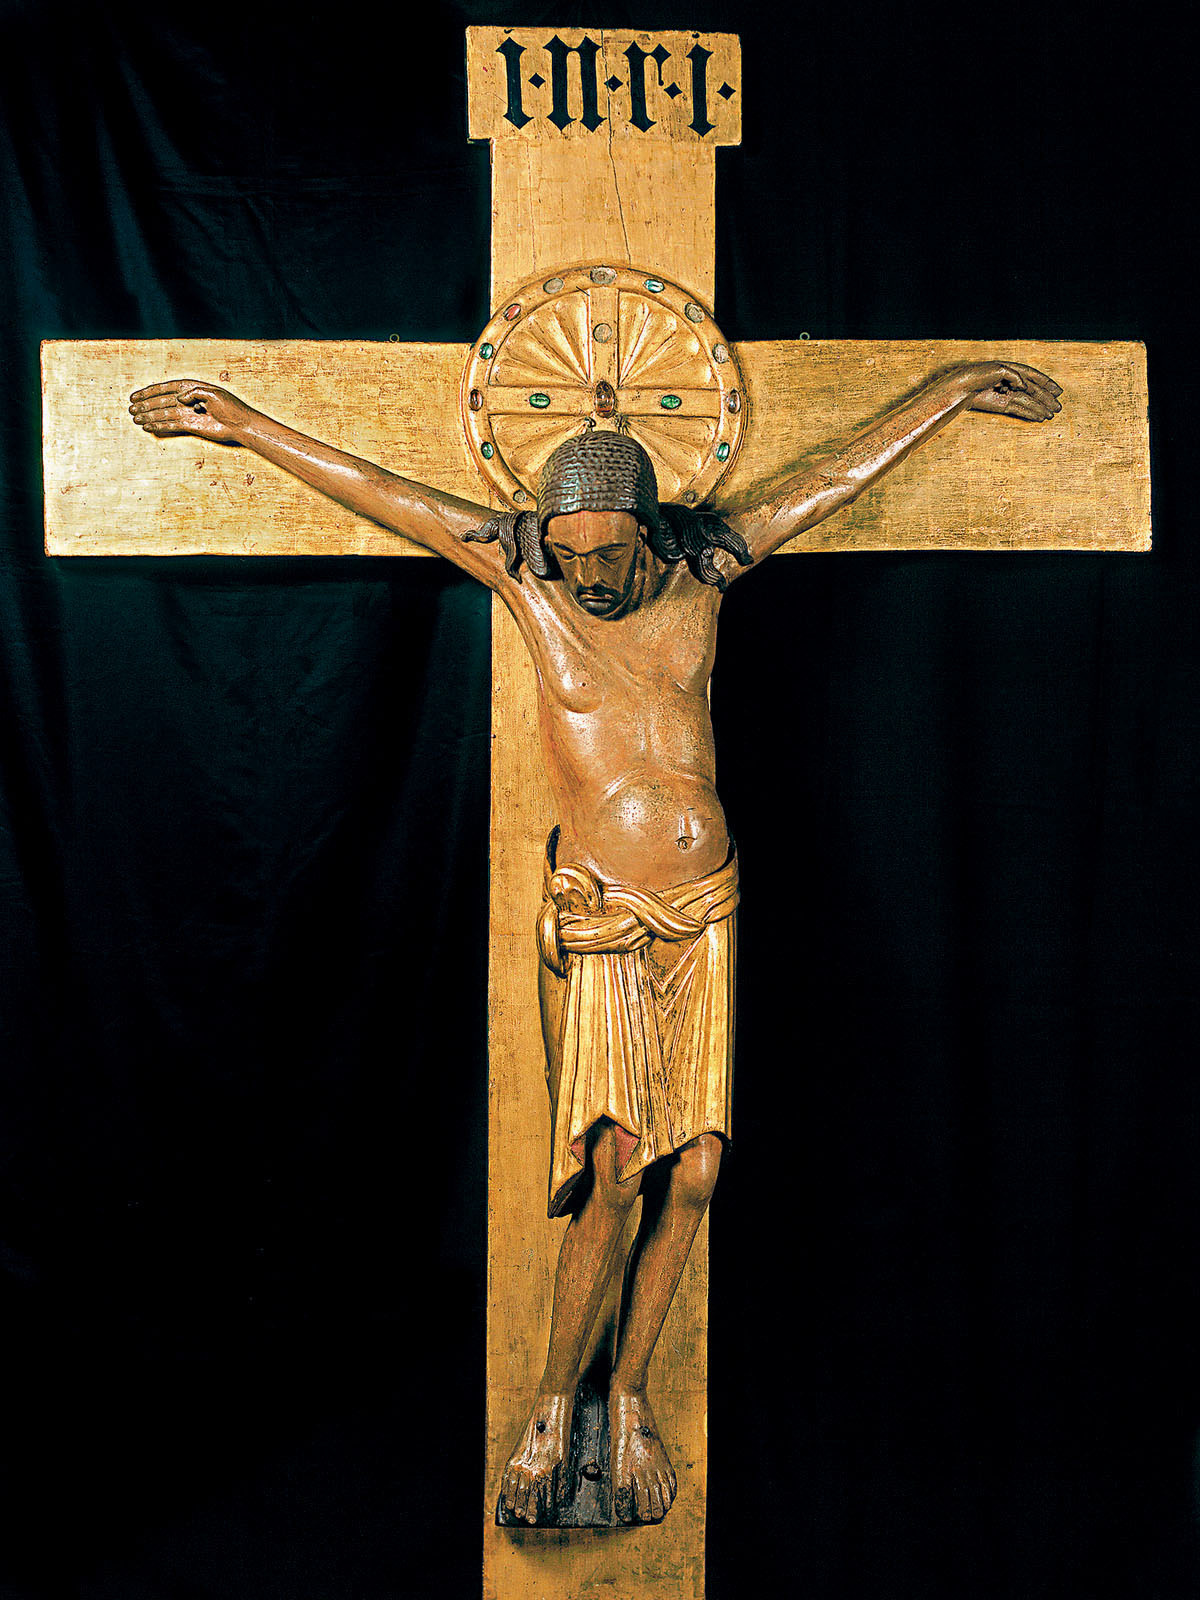 kutxx:
“1.
Gero Crucifixion (Romanesque period)
c. 975, wood painted and partially gilded, Cologne Cathedral, Cologne
”